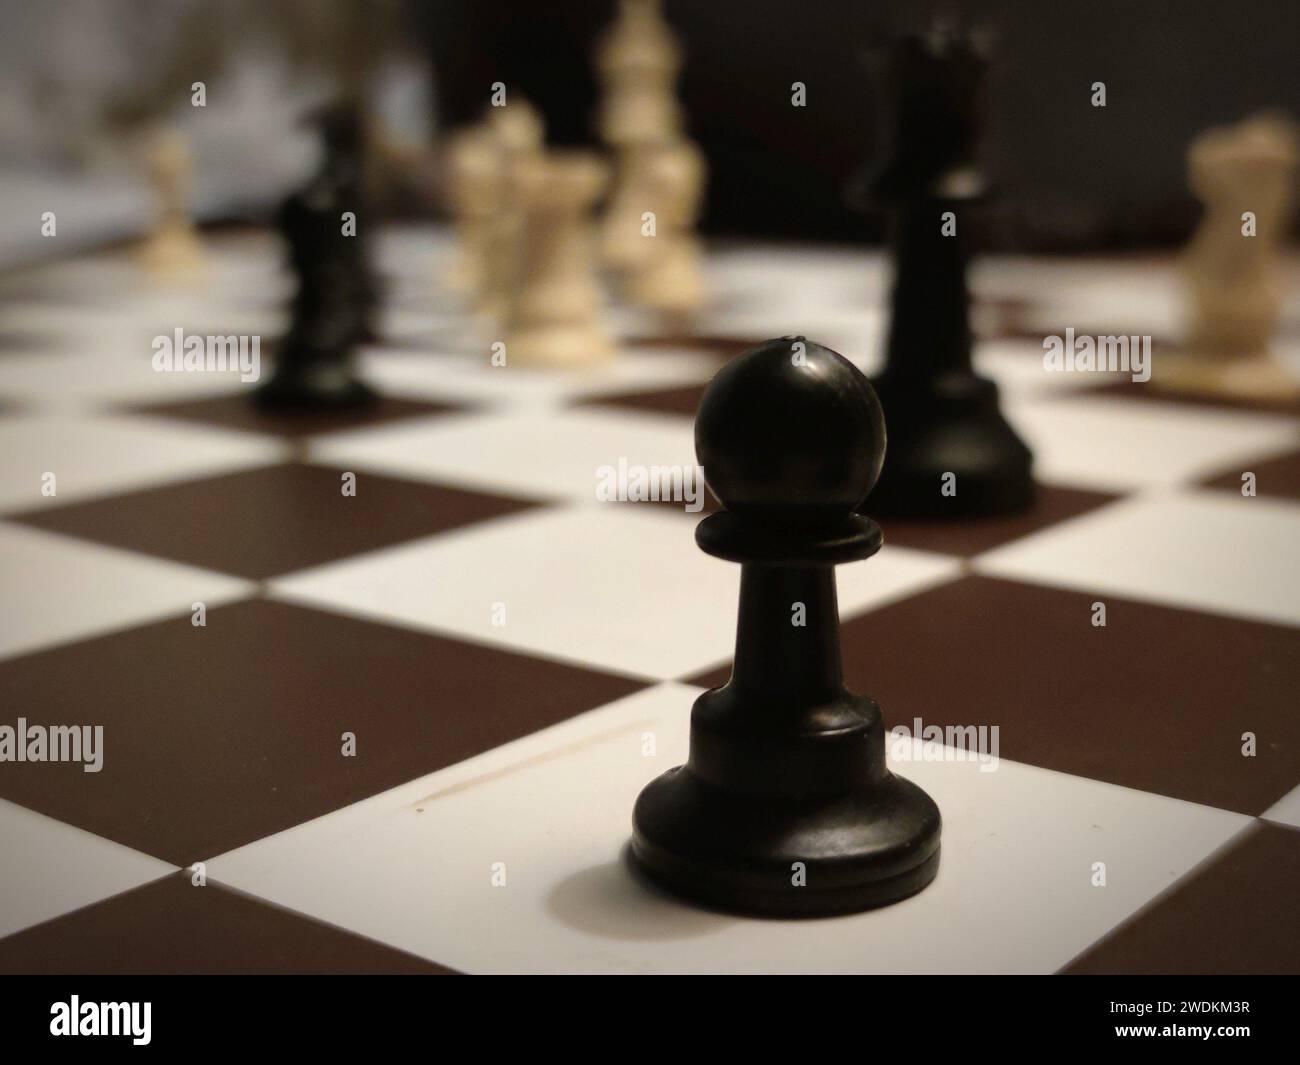 Detailed image of a black pawn on a chess board with other chess pieces in the background. Stock Photo